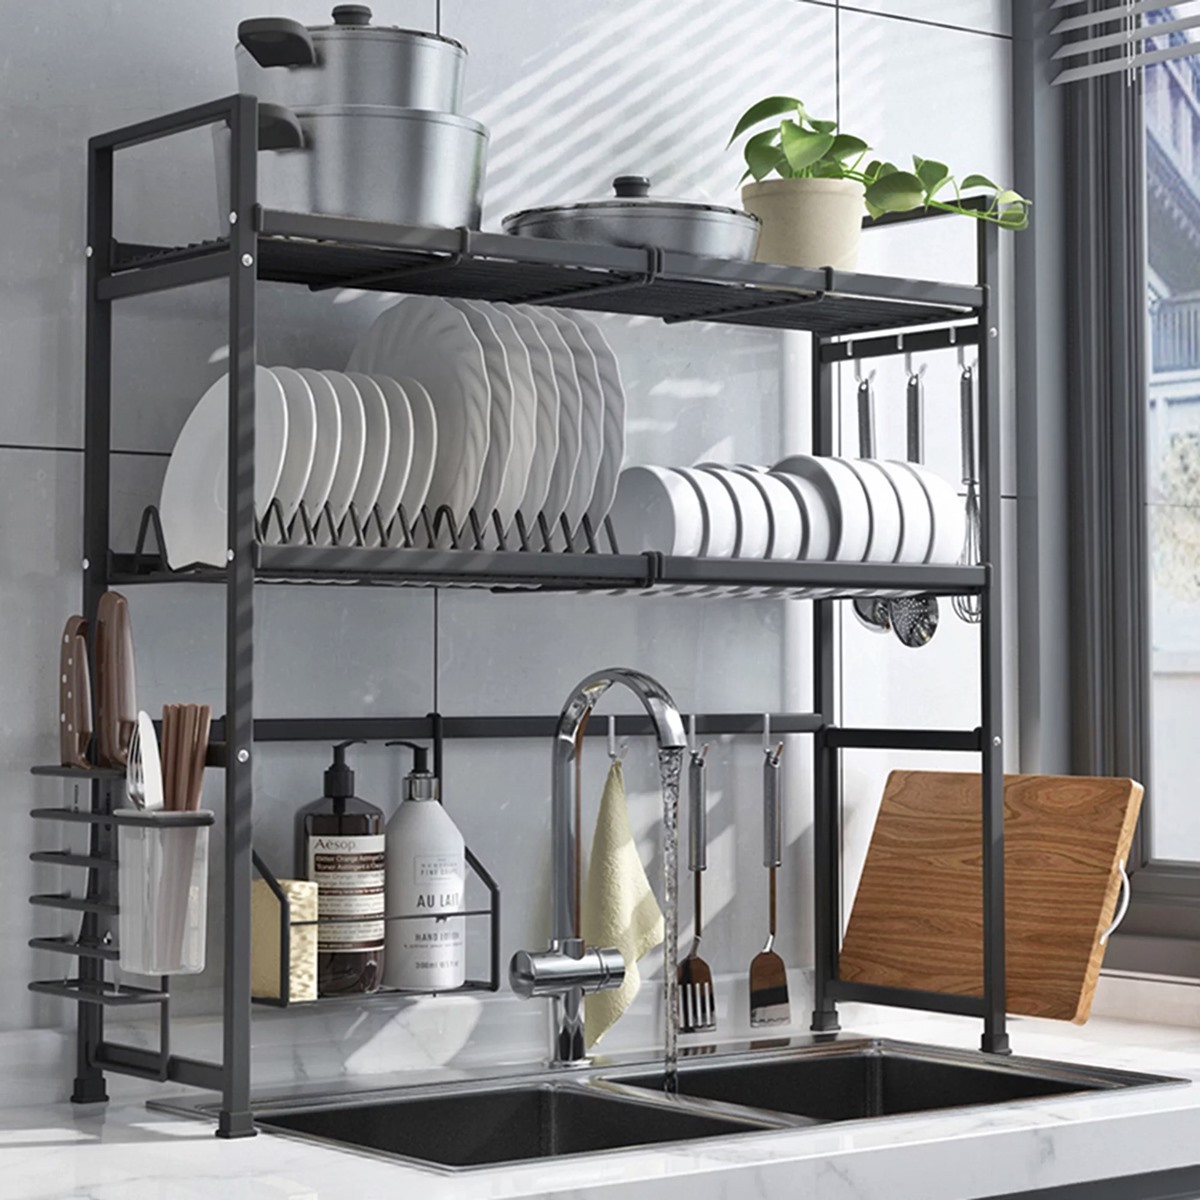 SwetLao Sink Dish Drying Rack, Expandable 304 Stainless Steel Metal Dish Drainer Rack Organizer Shelves with Stainless Steel Utensil Holder Over Inside Sink